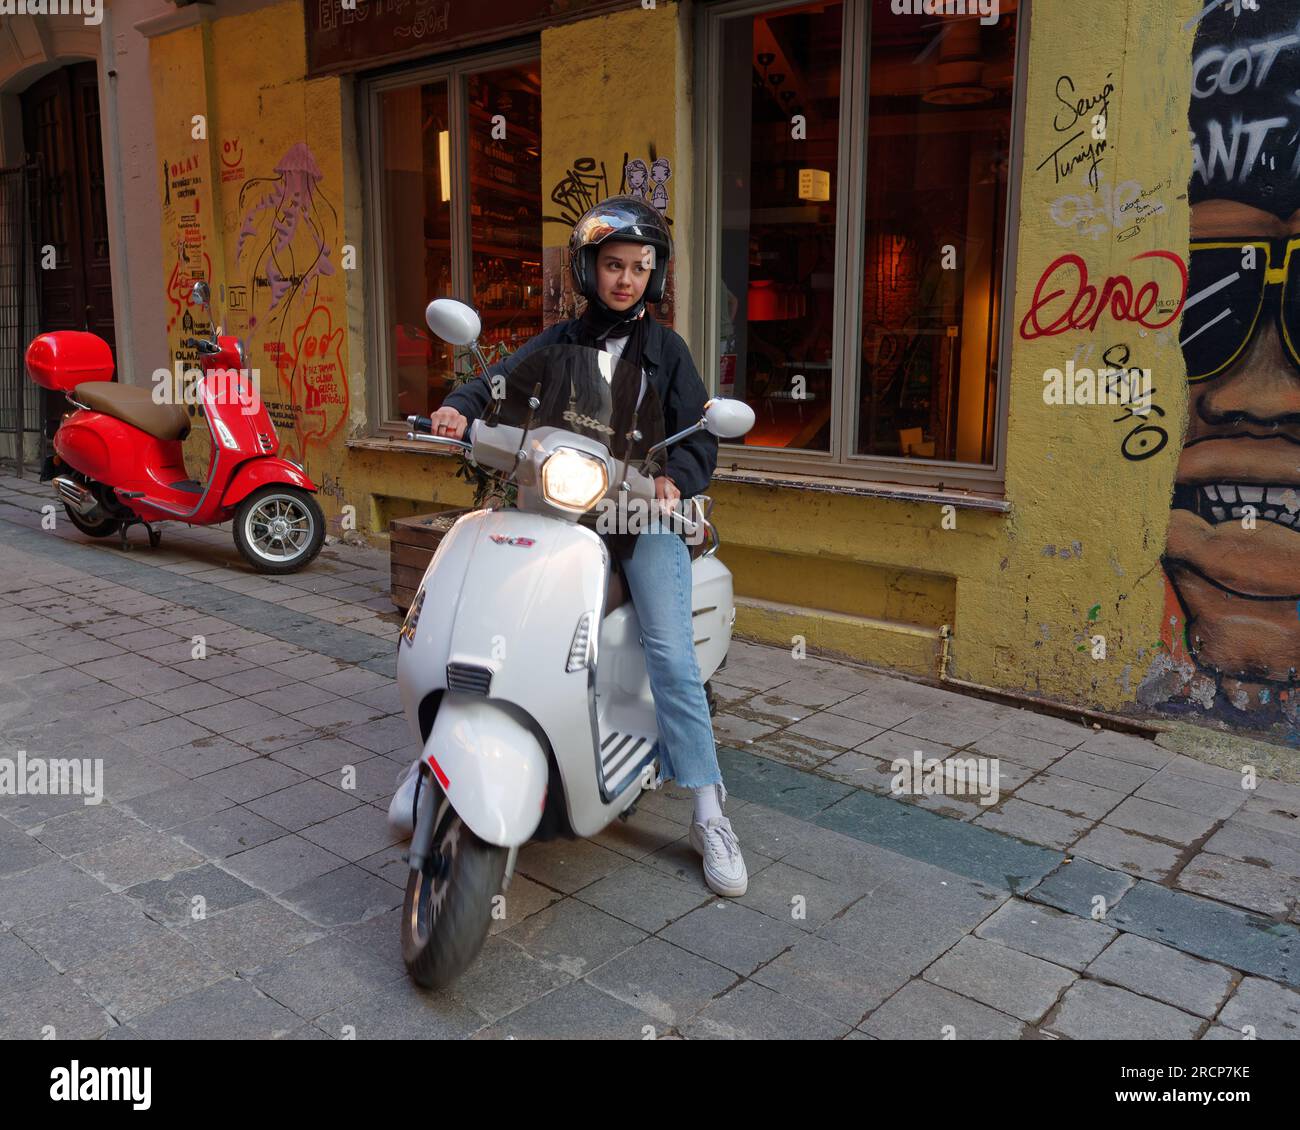 Young person on a white scooter with a red scooter behind on a street with a yellow wall in Istanbul, Turkey Stock Photo